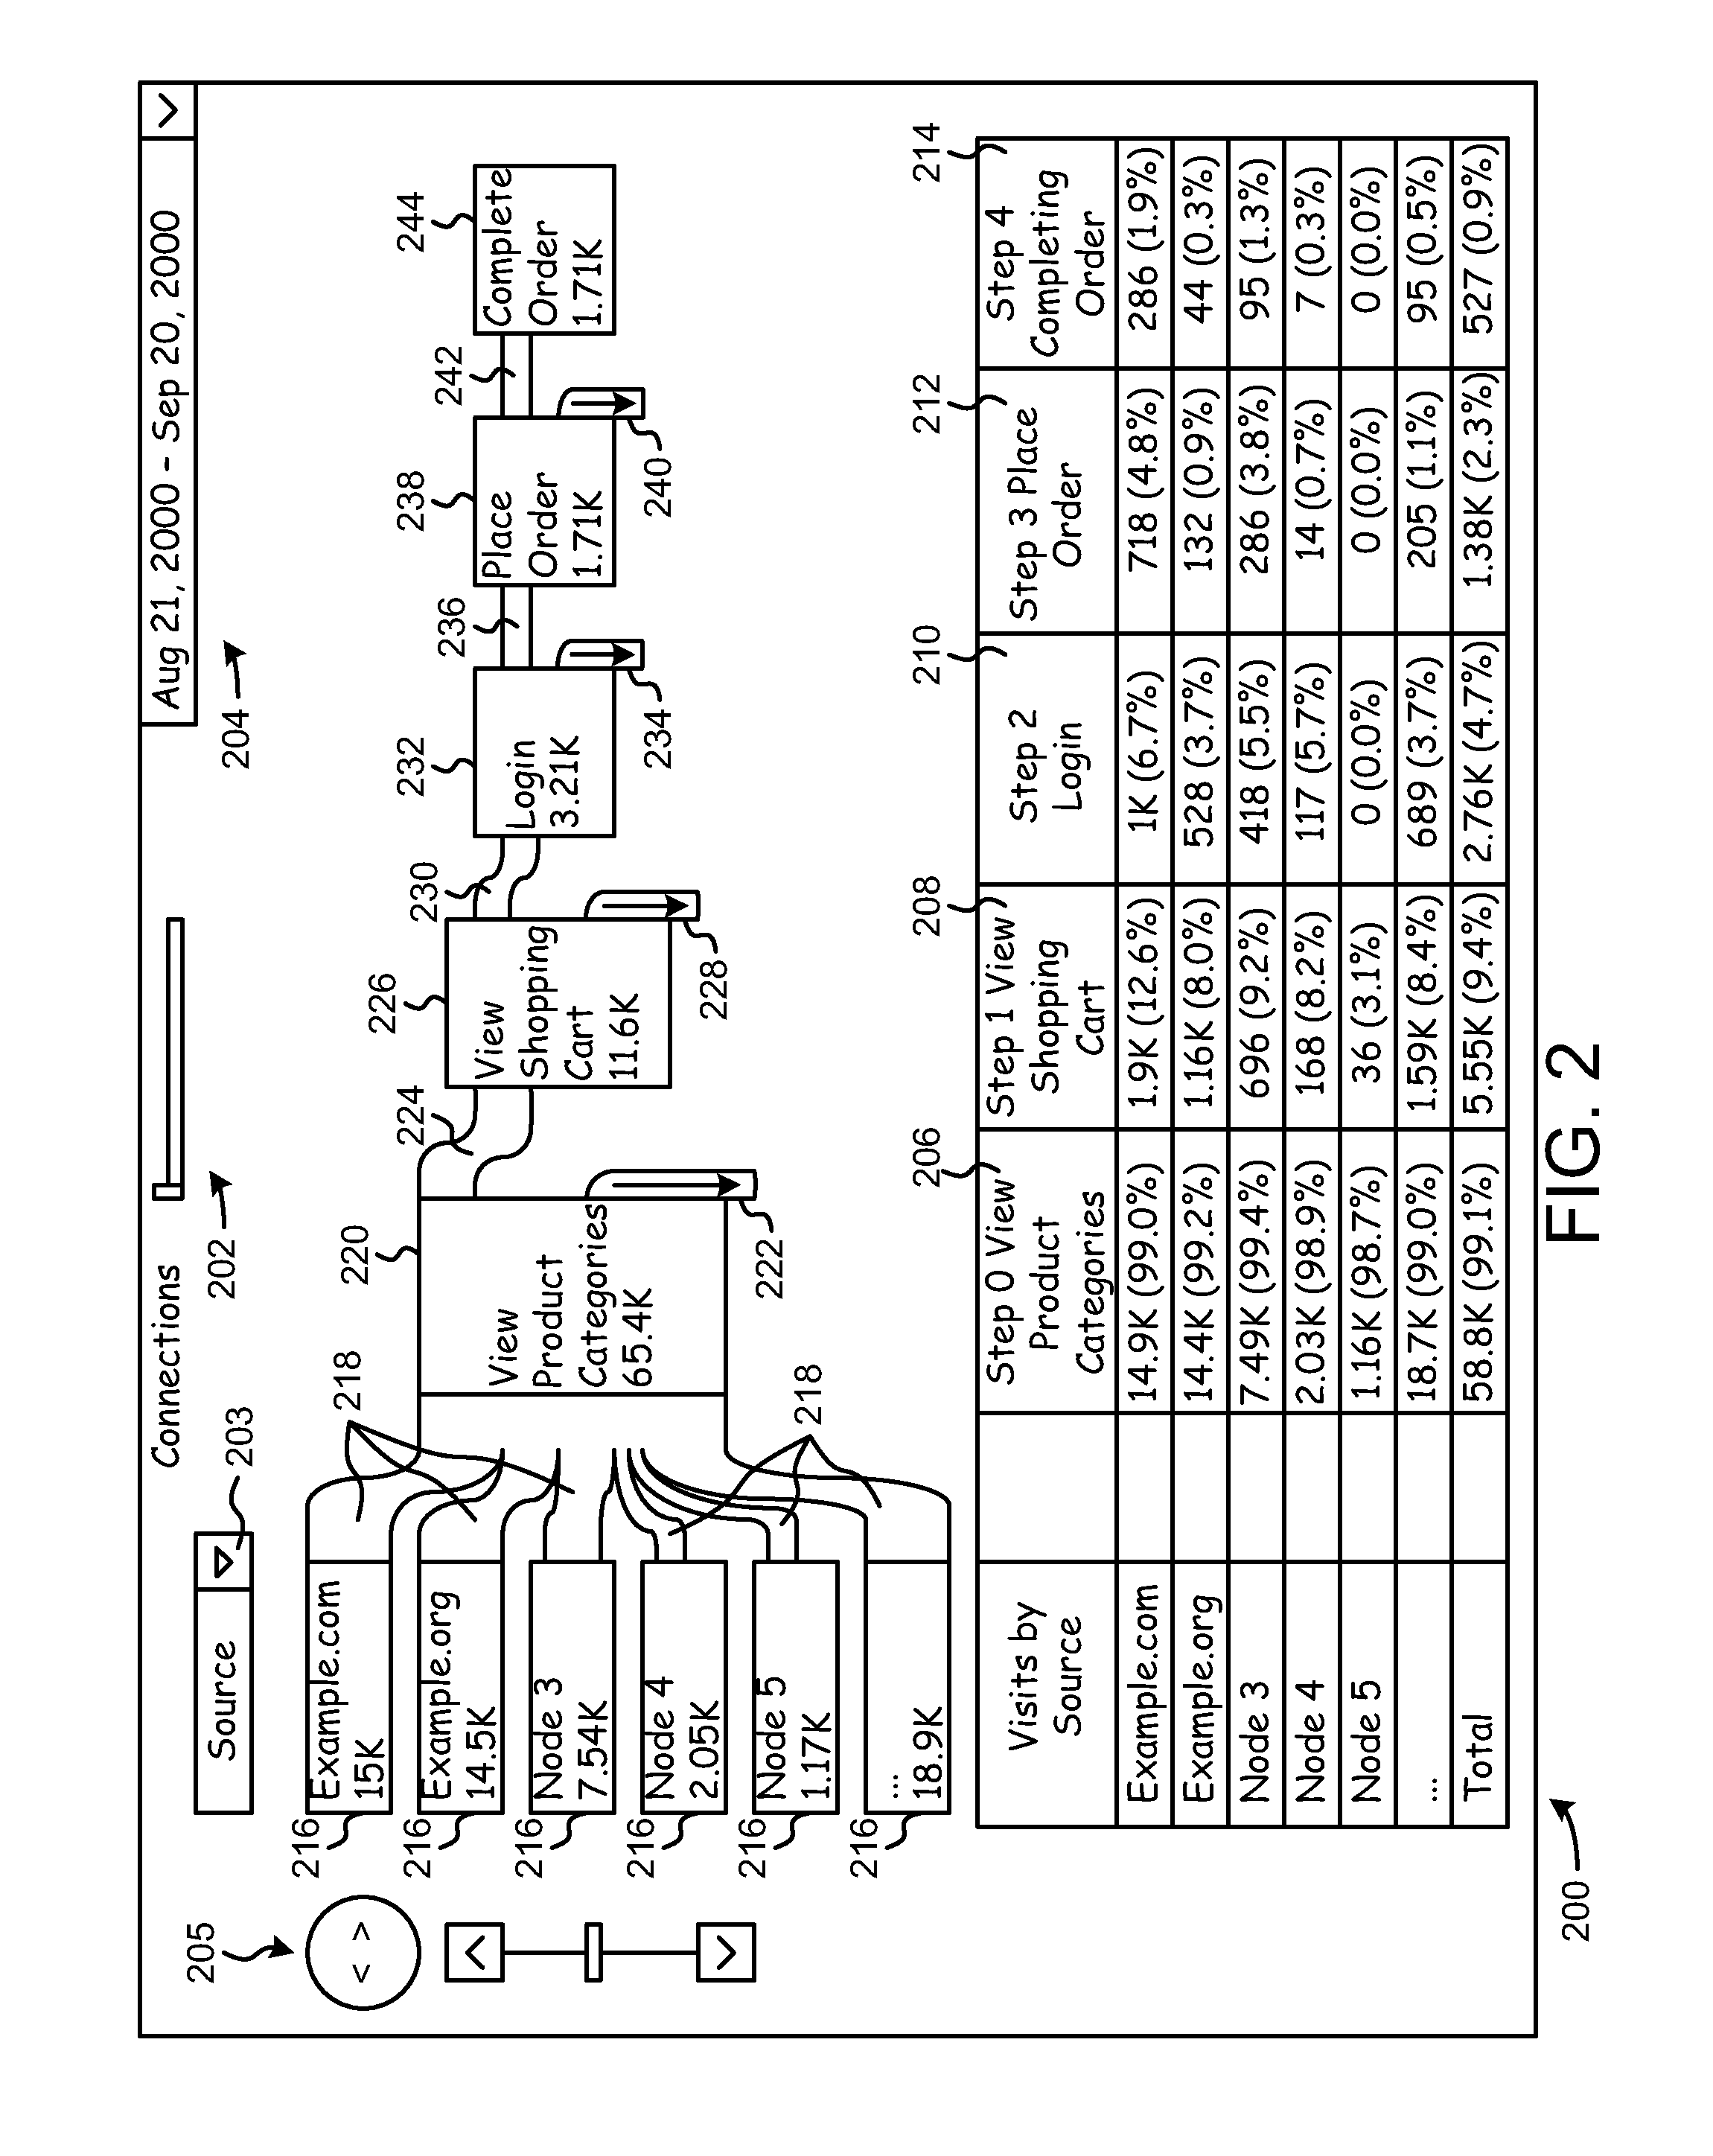 System and method for flow visualization and interaction with network traffic